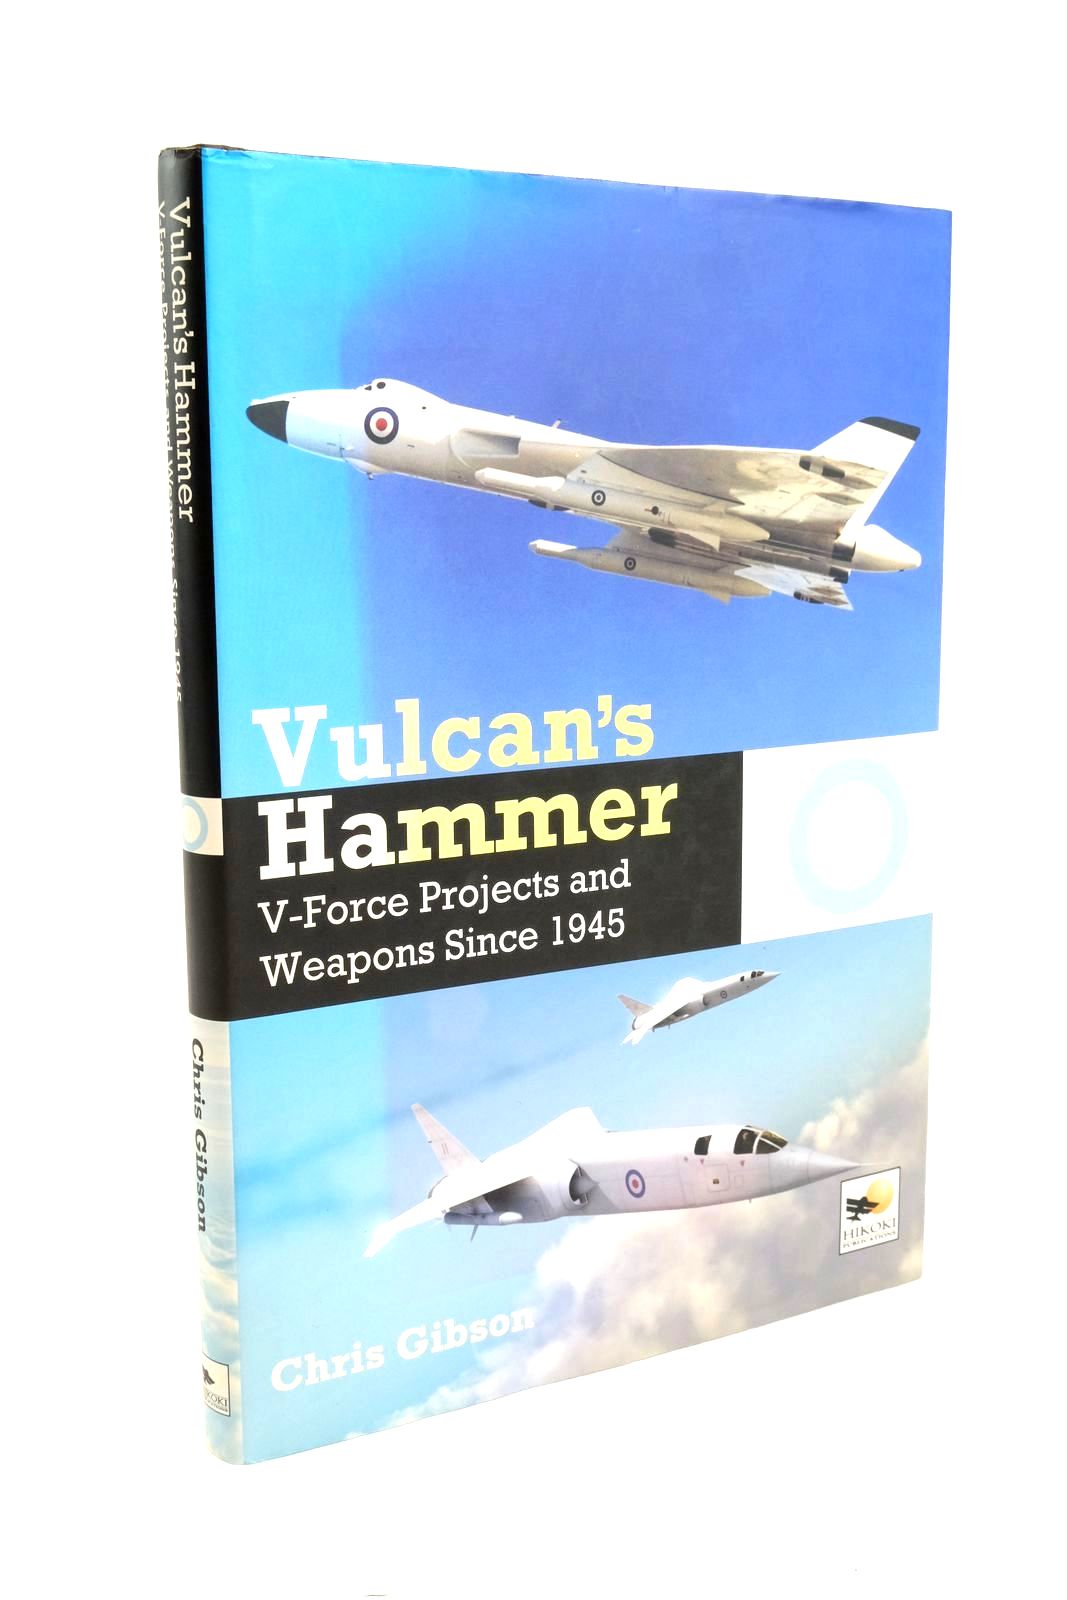 Photo of VULCAN'S HAMMER V-FORCE PROJECTS AND WEAPONS SINCE 1945 written by Gibson, Chris published by Hikoki Publications (STOCK CODE: 1322181)  for sale by Stella & Rose's Books